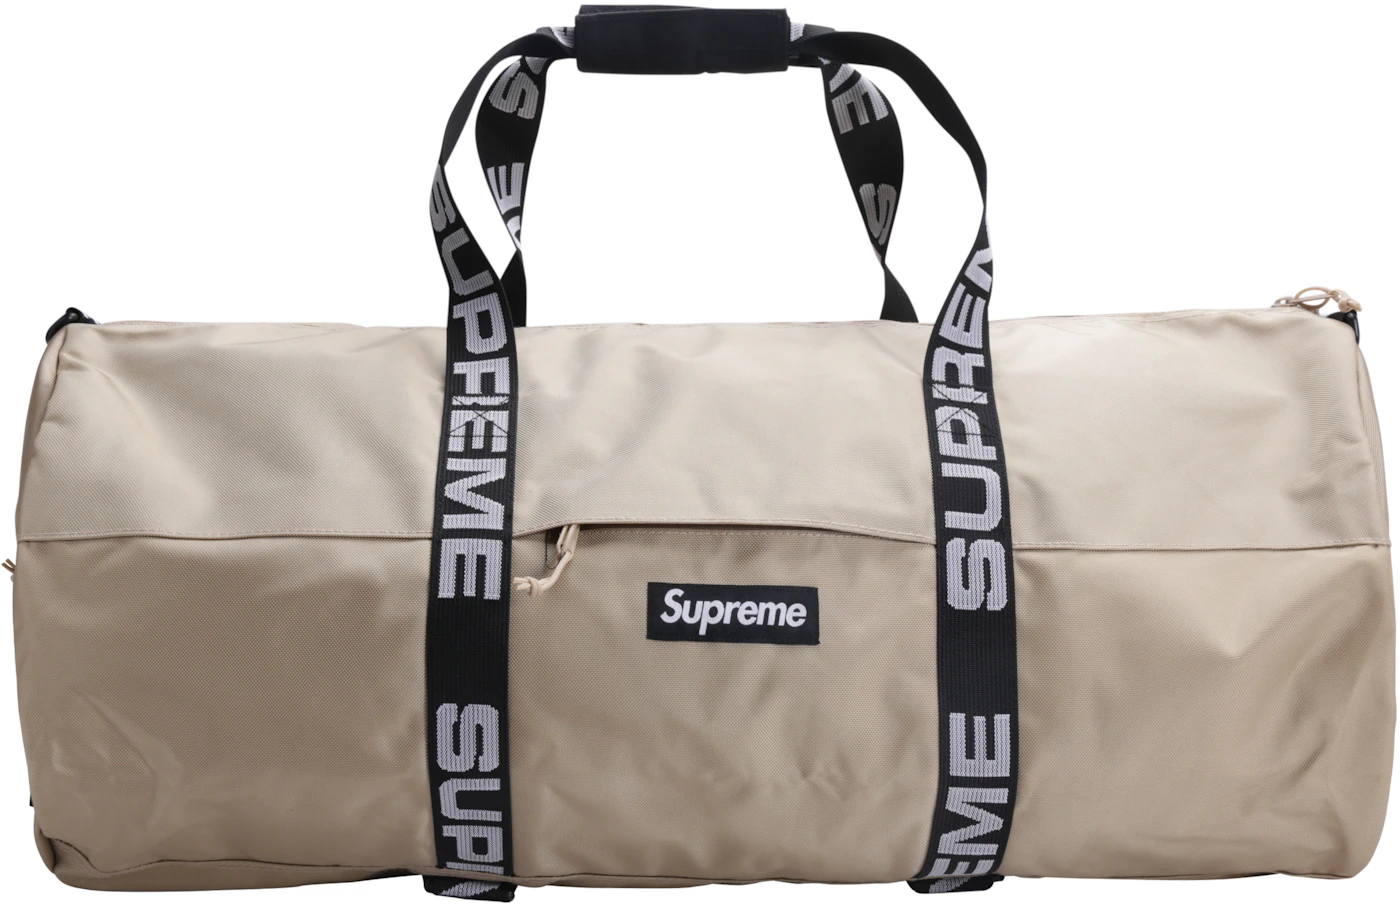 Chamber Of Soles - SUPREME LOUIS VUITTON DUFFLE BAG $7,000 or best offer!  (SERIOUS BUYERS ONLY) 🙏🏽  📩 DM FOR INFO#chamberofsoles #sweats  #supremehoodie #supremestickers #supremehat #supremeforsale #supreme #bape  #hoodie